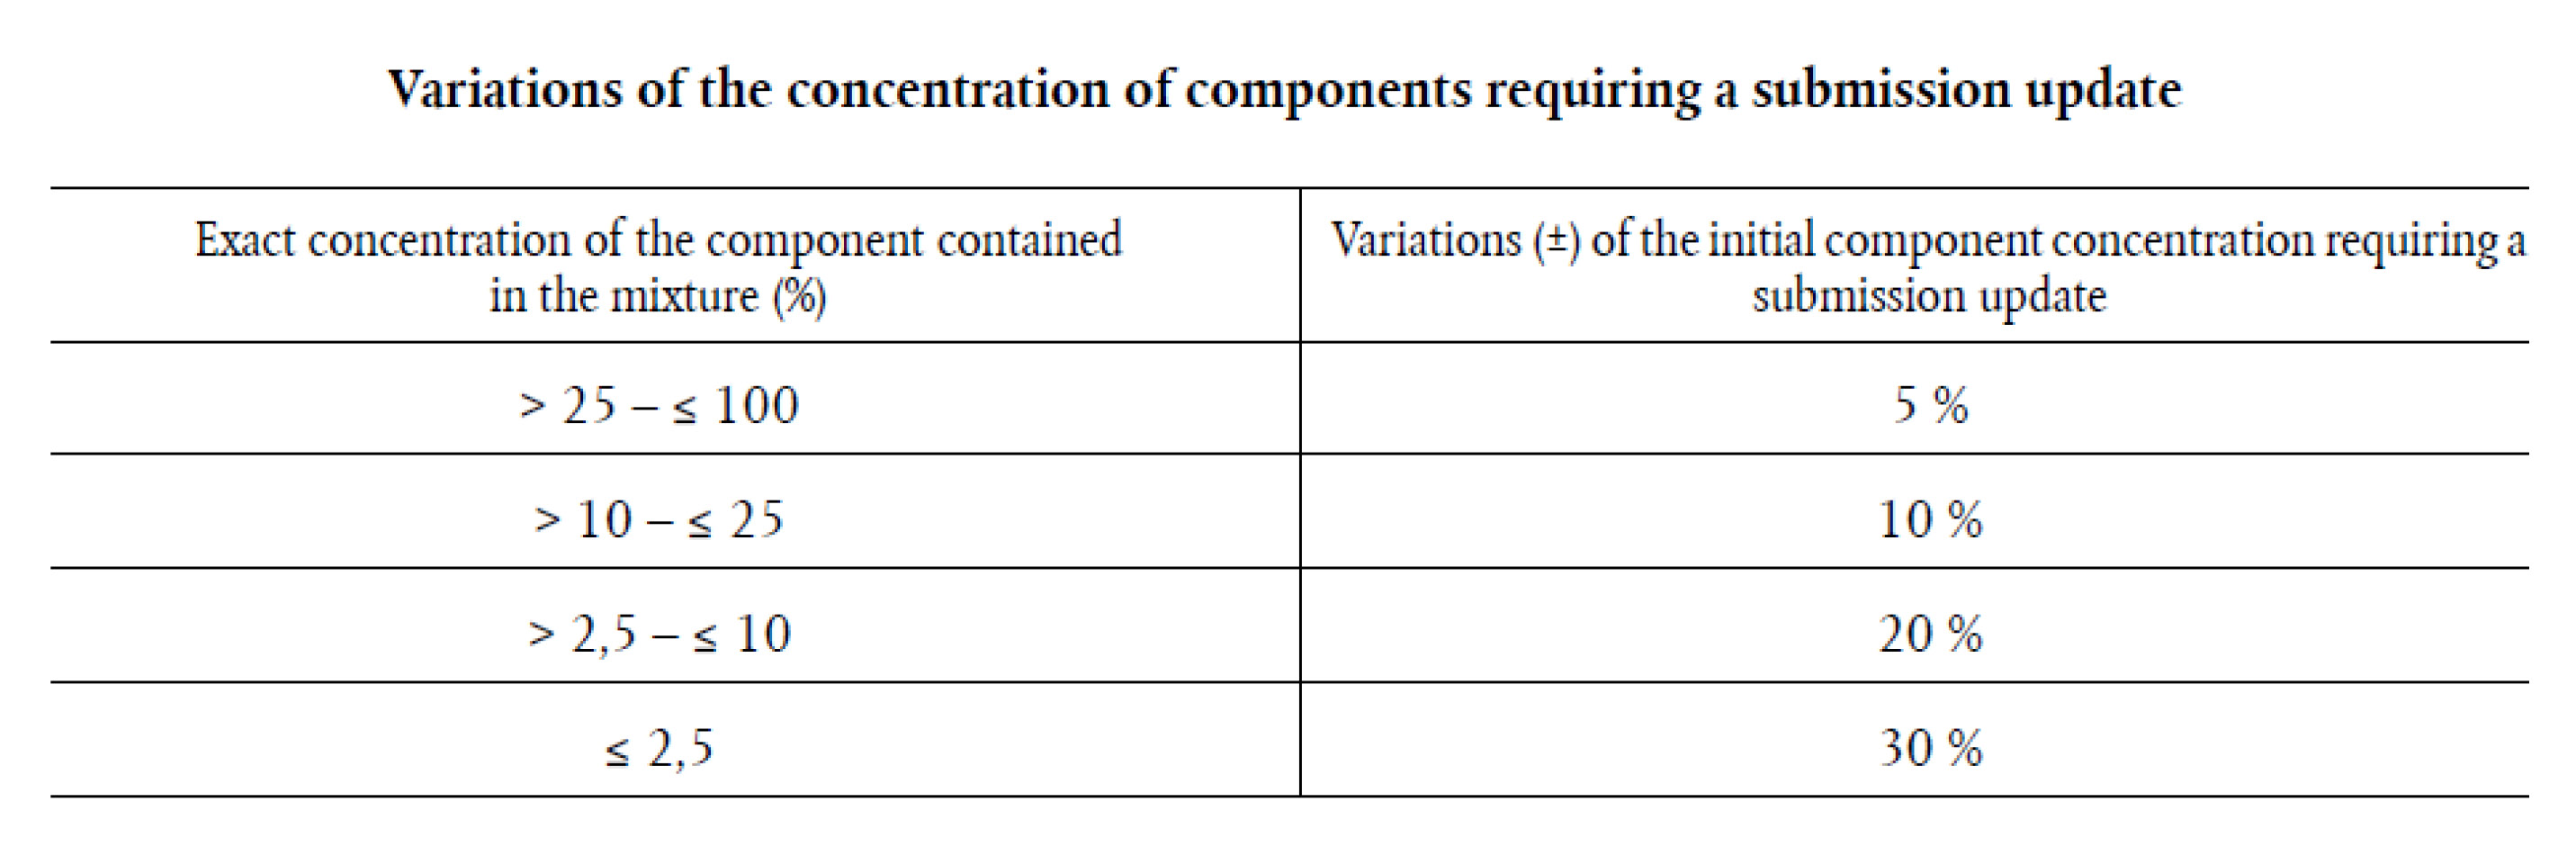 Variations of the concentration of components requiring a submission update